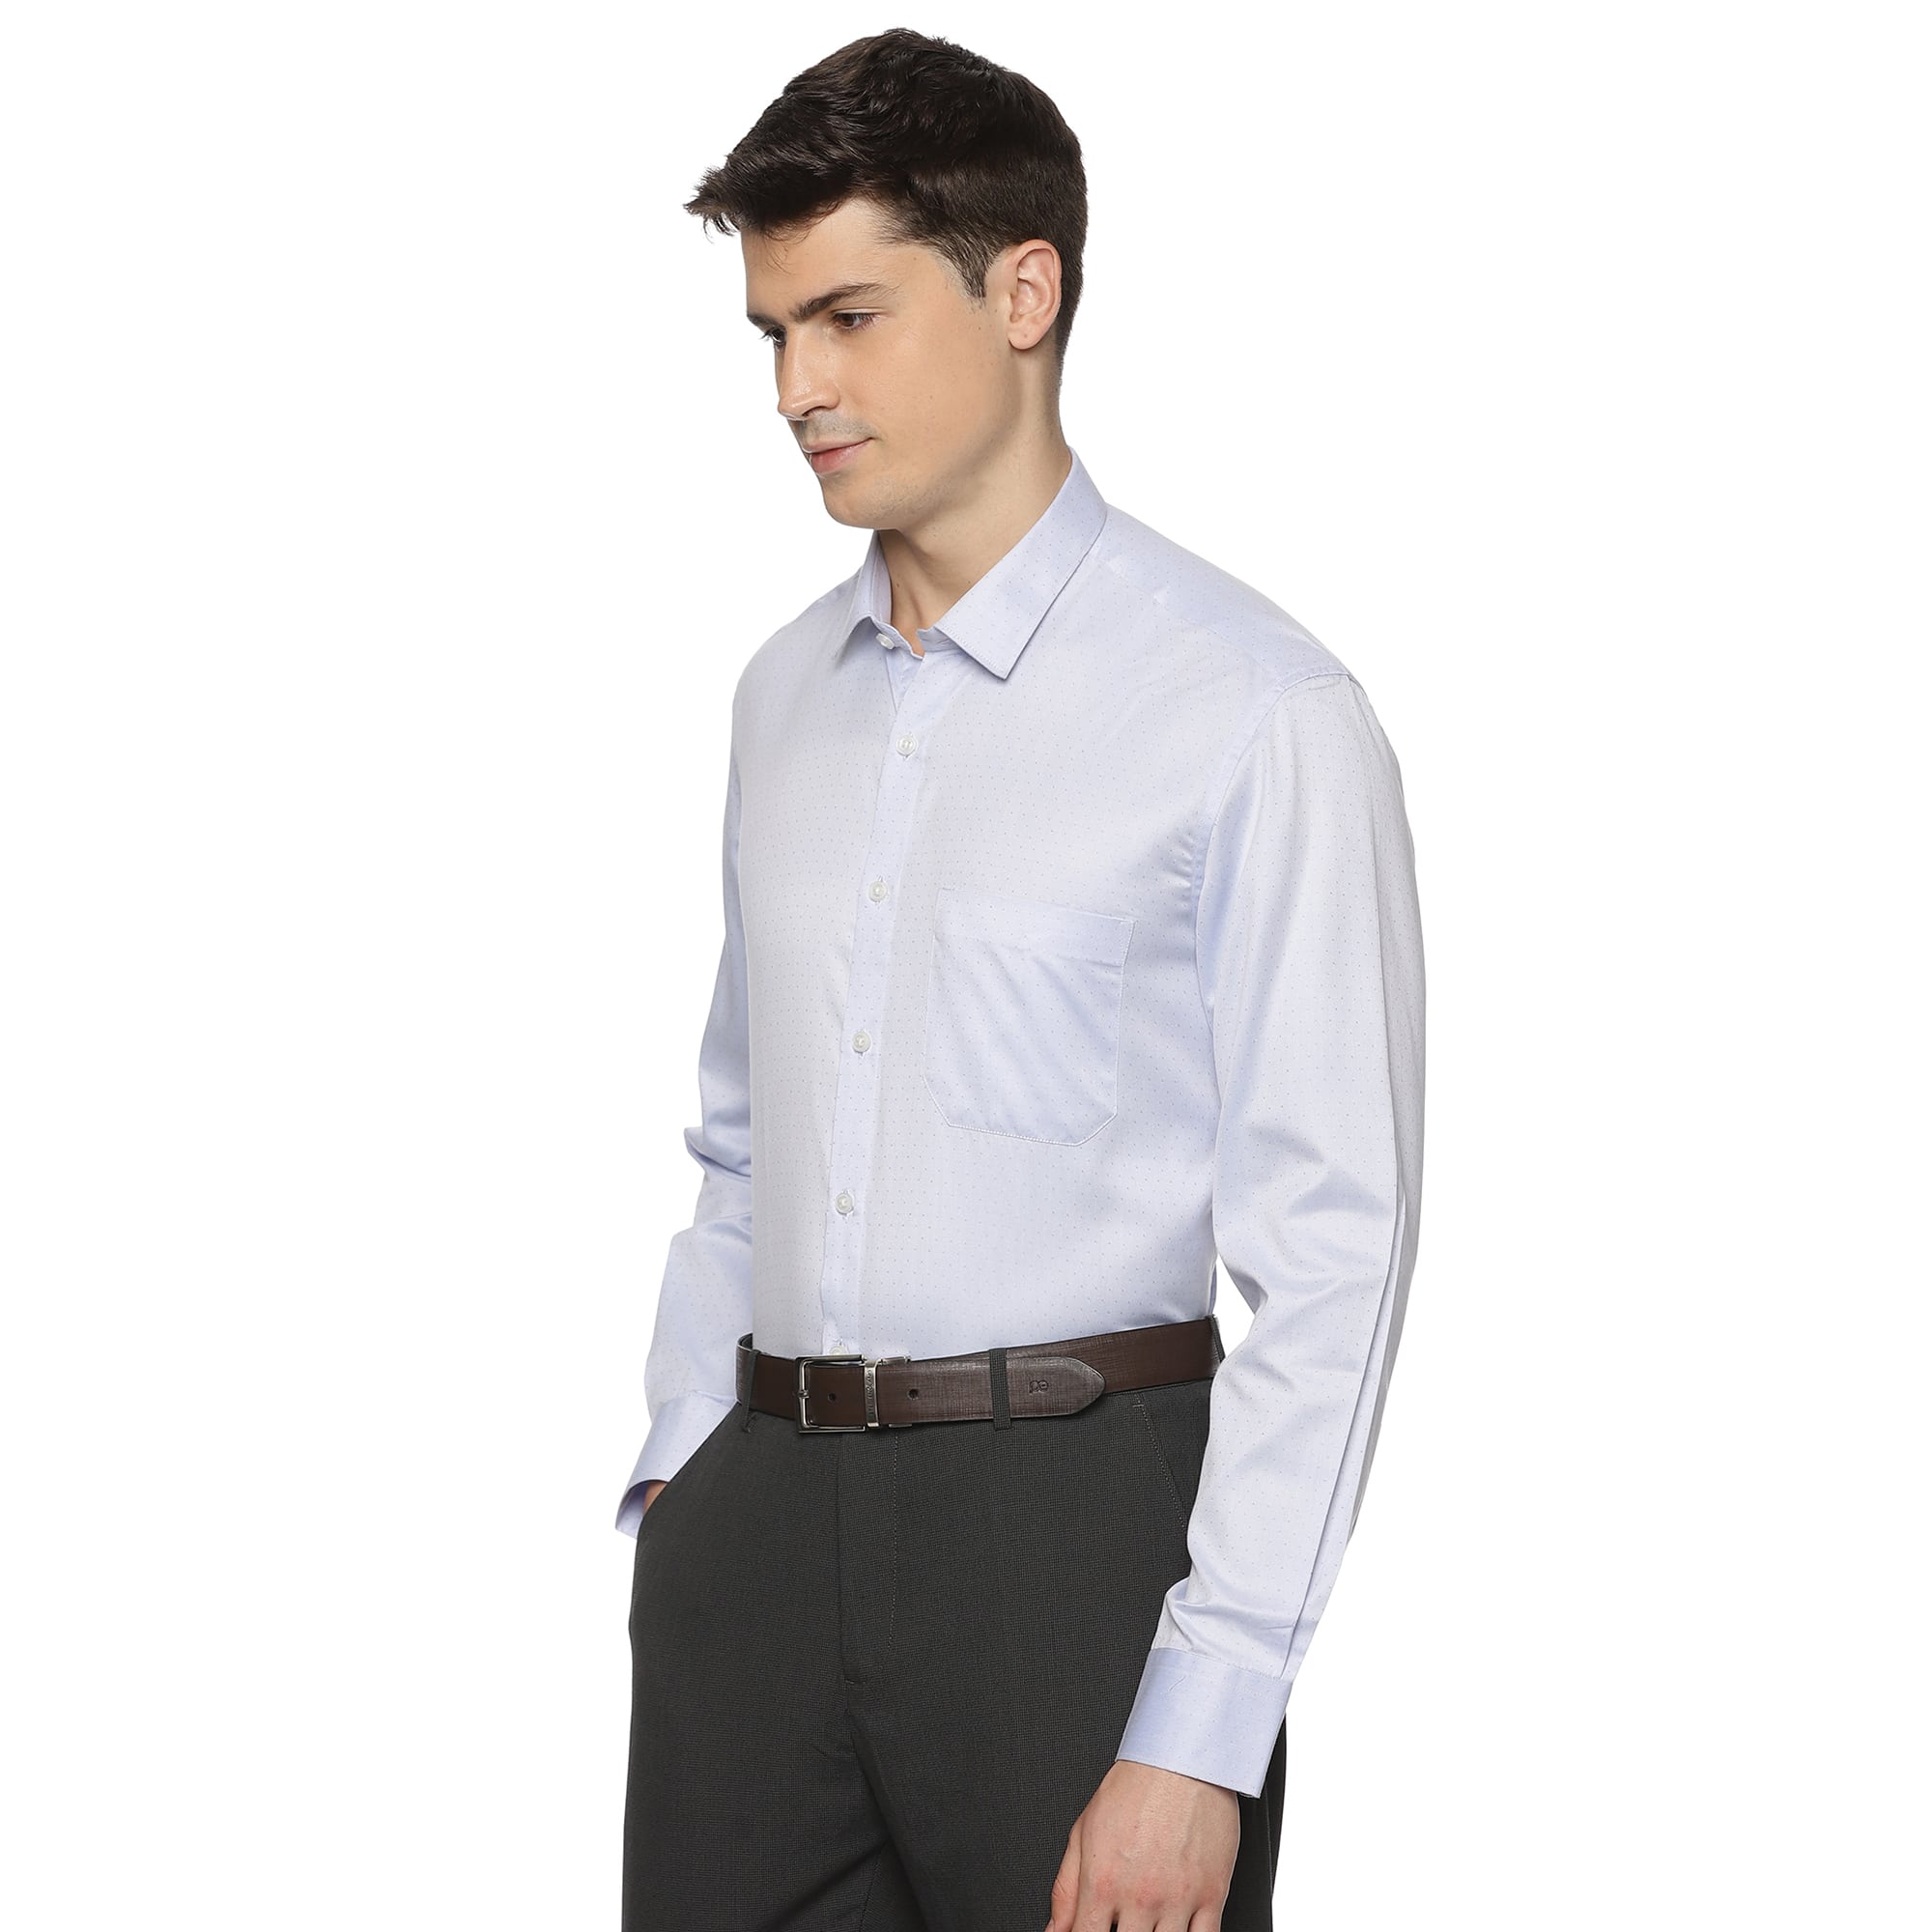 Donald Dobby Textured Shirt in Blue - The Formal Club